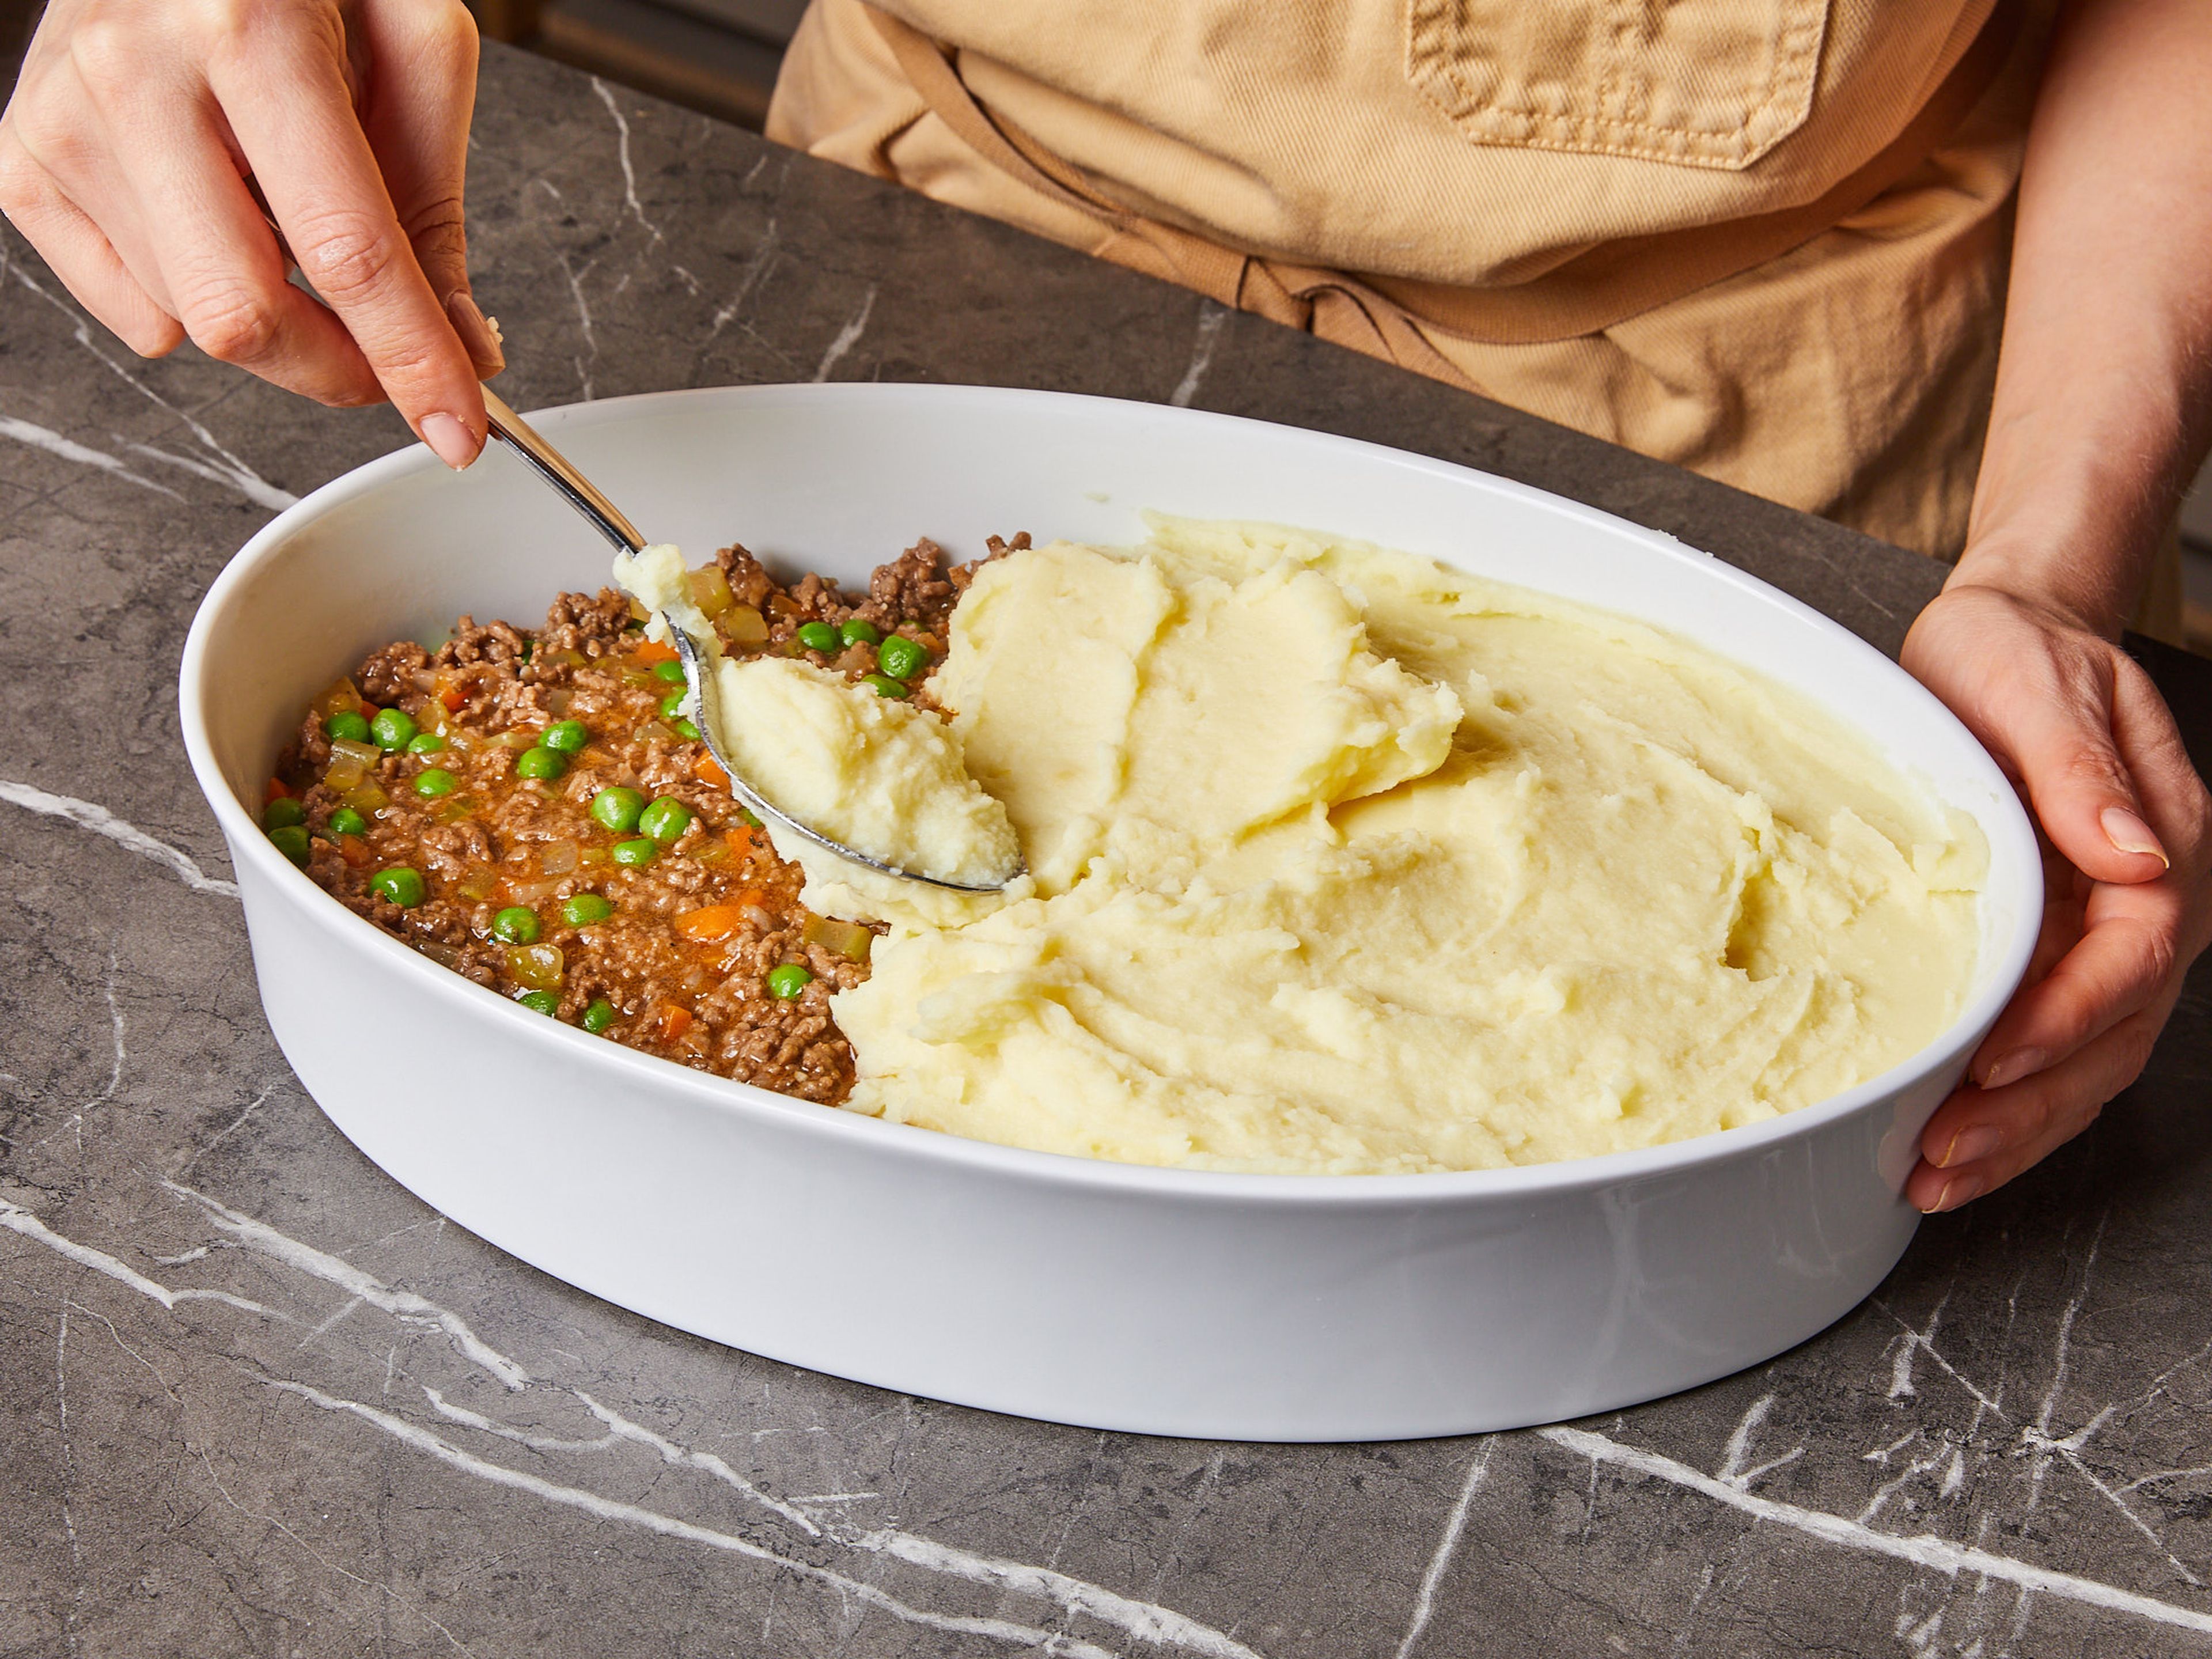 Add the peas in. Transfer everything to a baking dish and evenly cover with mashed potatoes. Sprinkle Parmesan on top and bake for approx. 20 min in the preheated oven until golden brown.